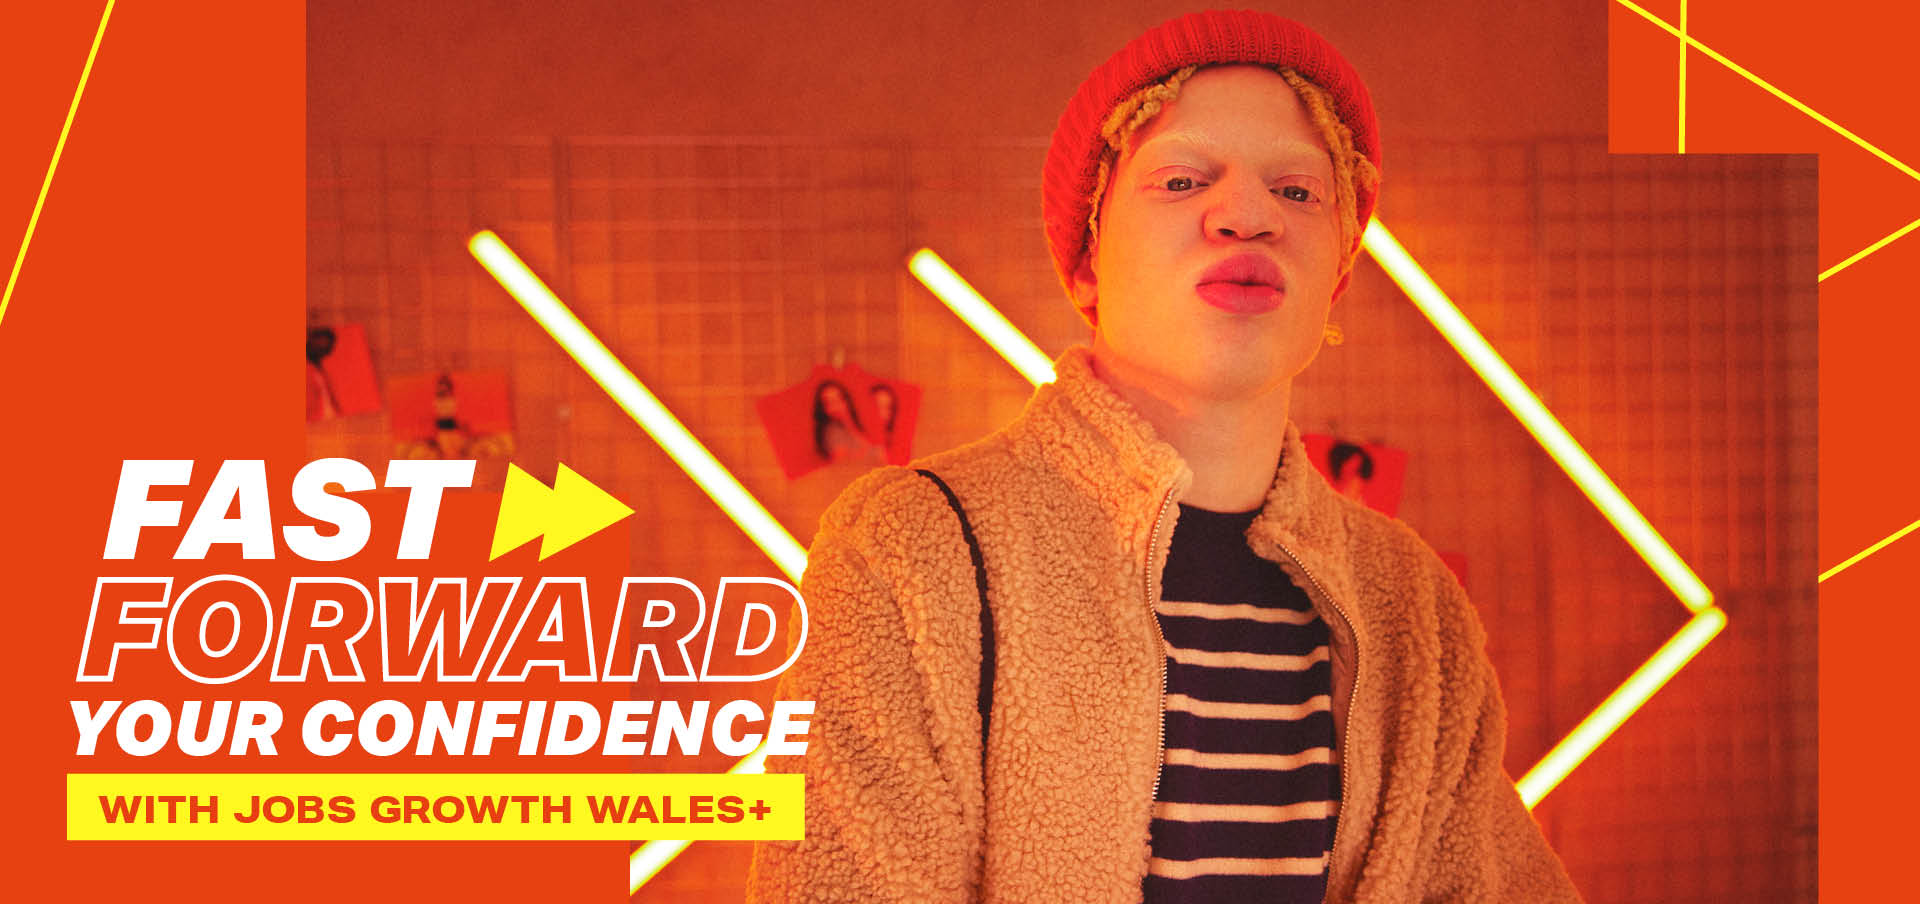 Fast forward your confidence with Jobs Growth Wales+. Confident young male facing direct to camera